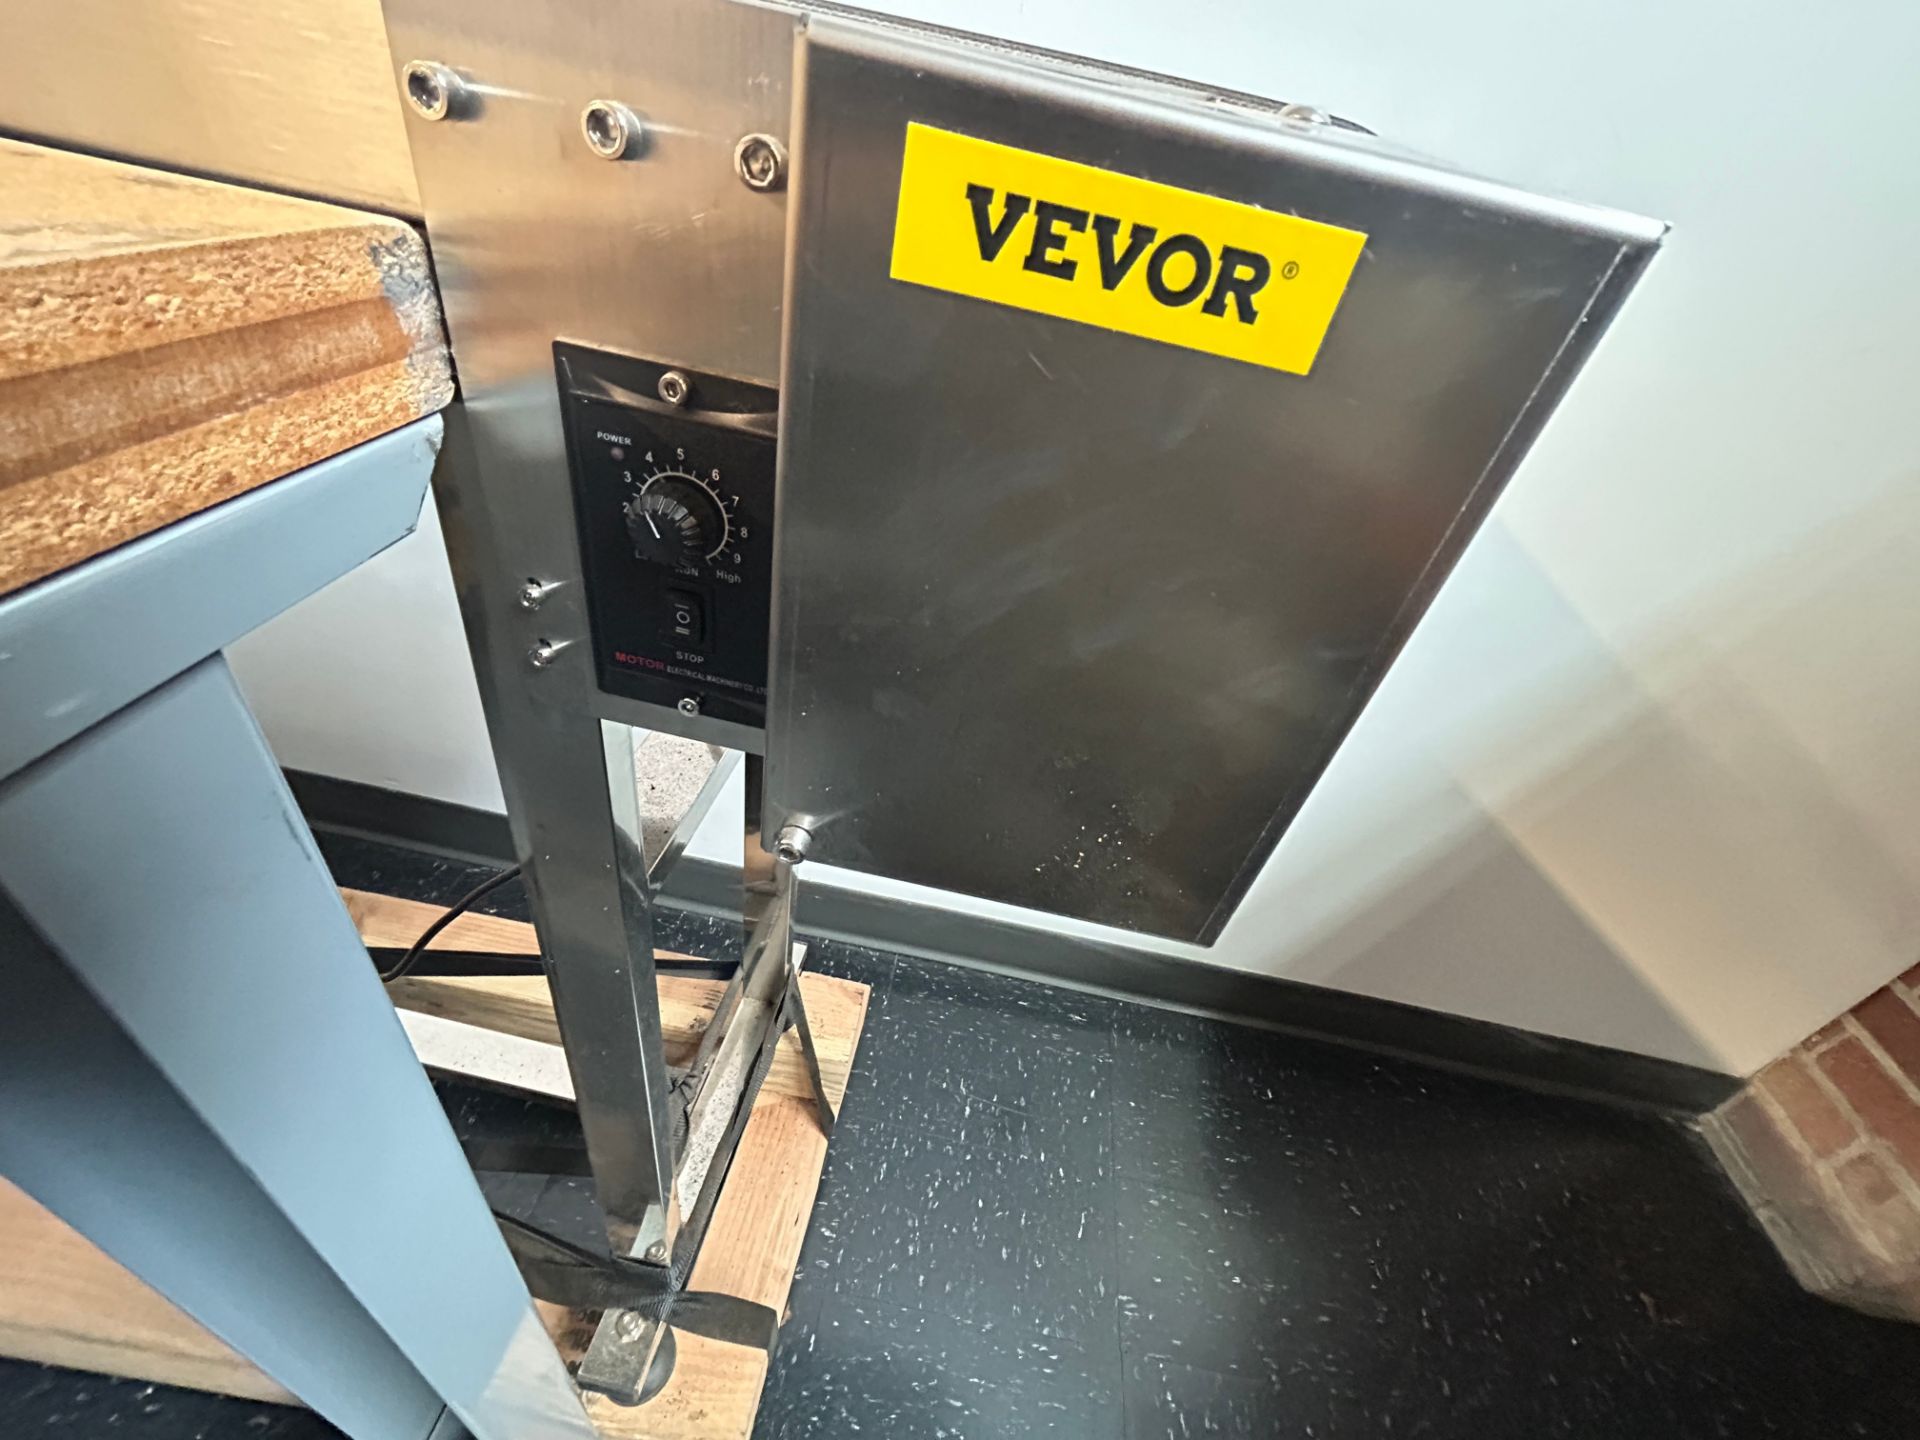 Vevor Mdl ITC Adjustable, 12 Inch Wide x 56 Inch Long Flat Belt Conveyor With Variable Speed - Image 3 of 4